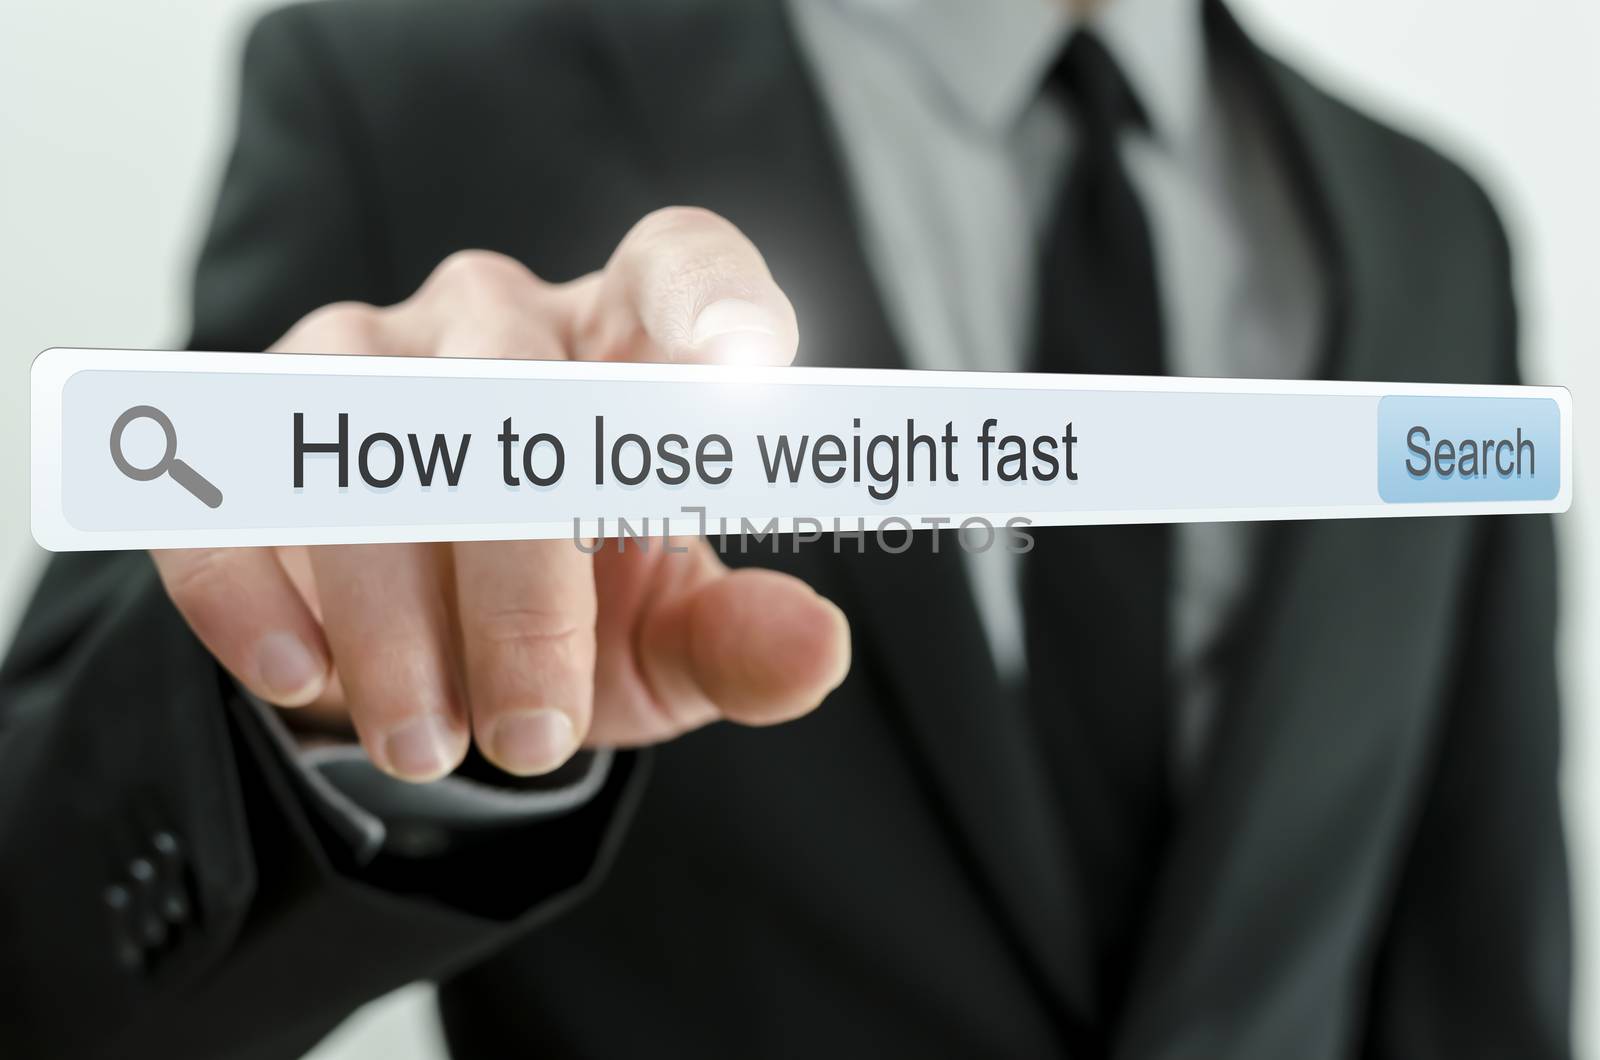 How to lose weight fast written in search bar by Gajus